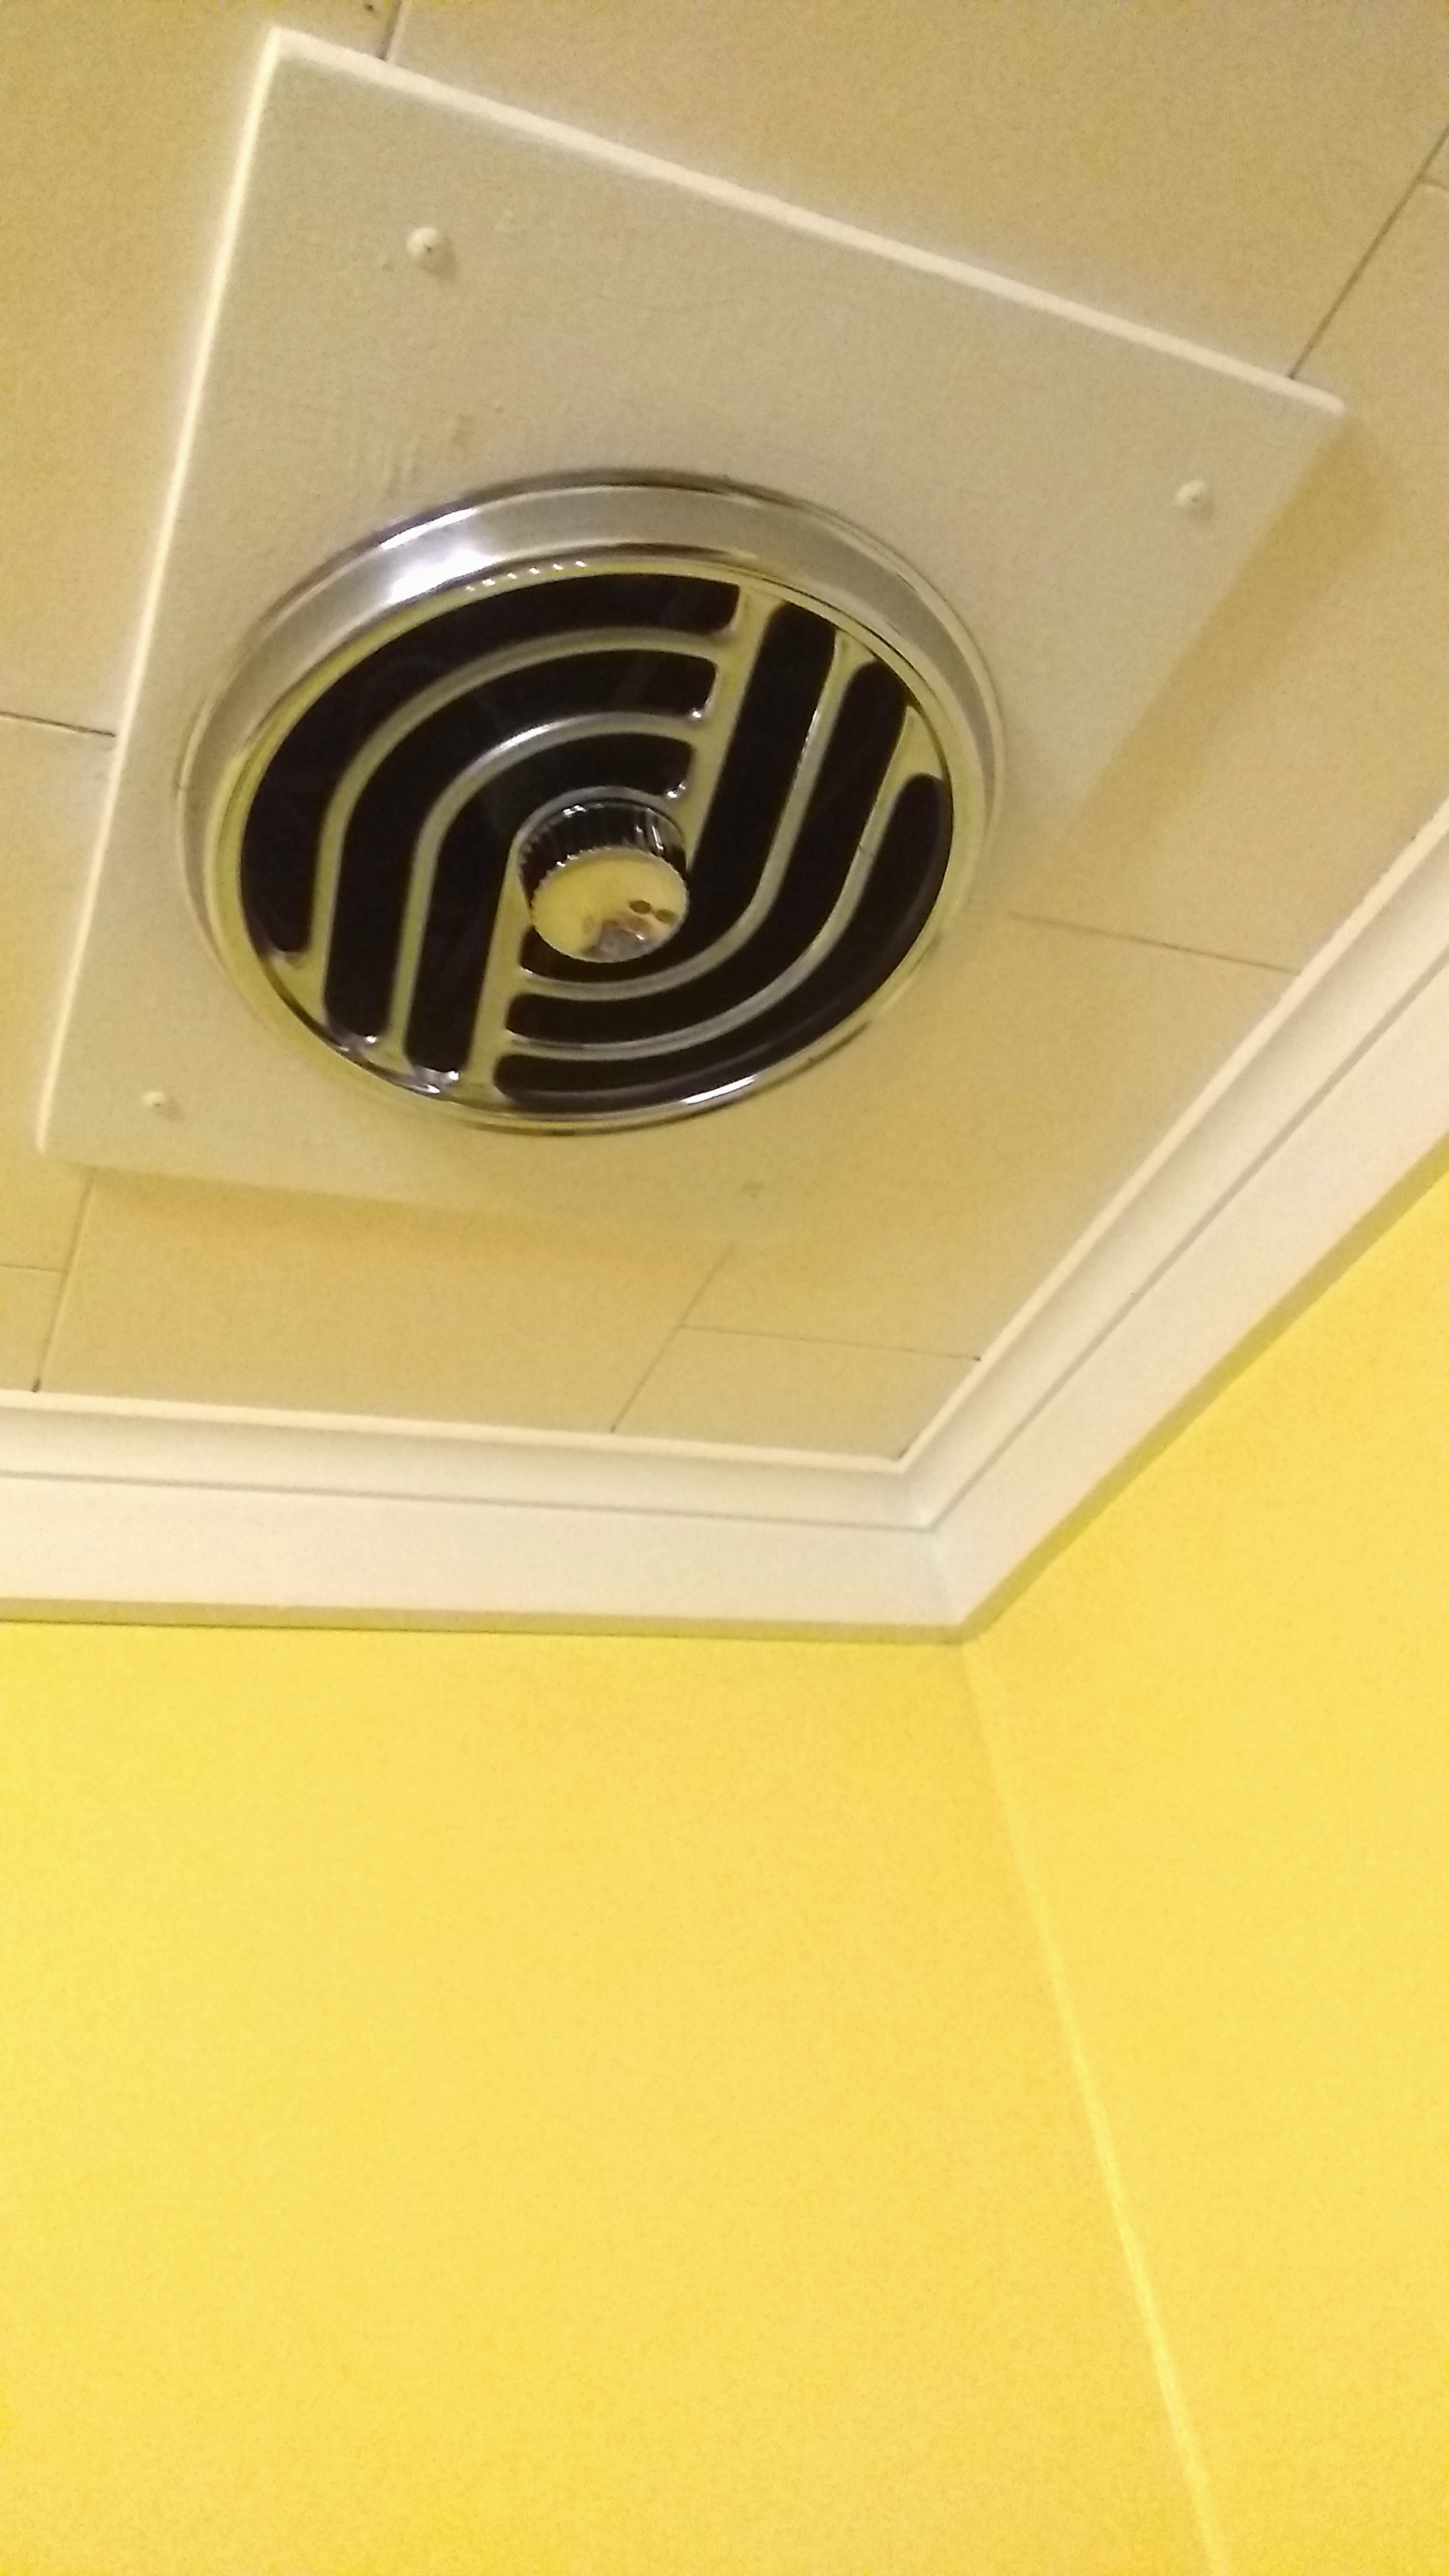 small, circular exhaust hood built into the ceiling